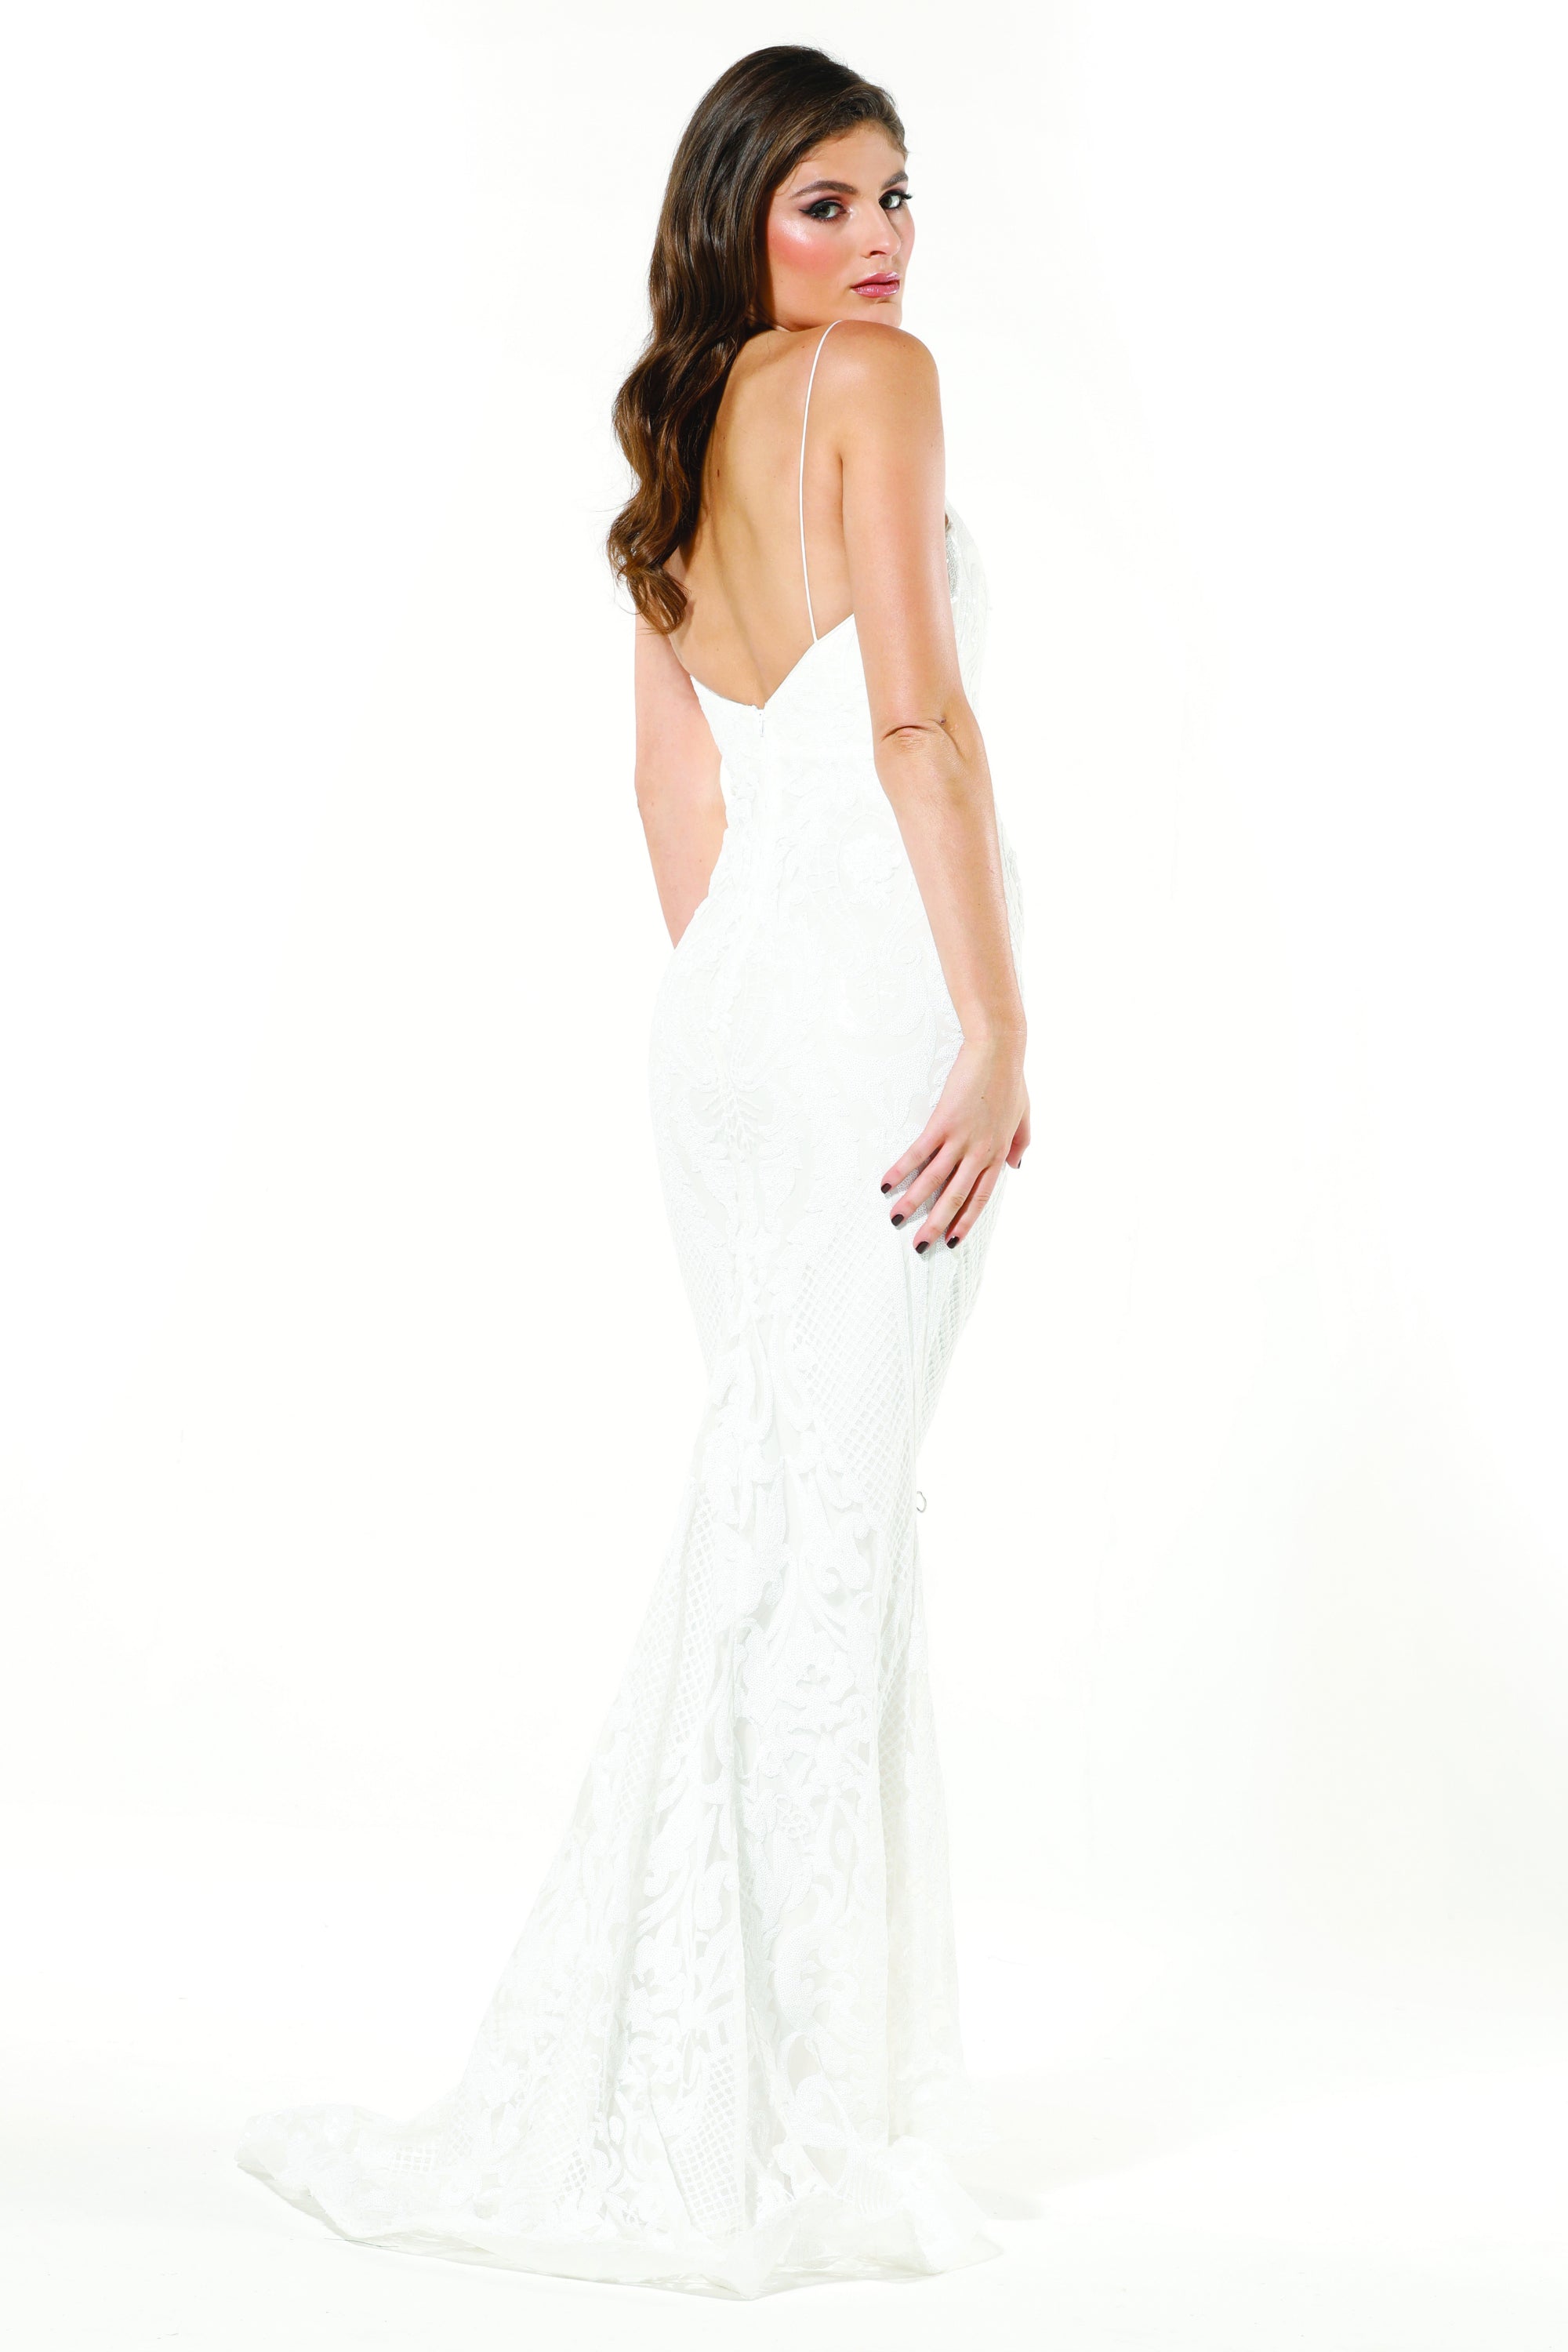 Tinaholy Couture T19280 White &amp; White Wedding Mermaid Formal Dress Tina Holly Couture$ AfterPay Humm ZipPay LayBuy Sezzle